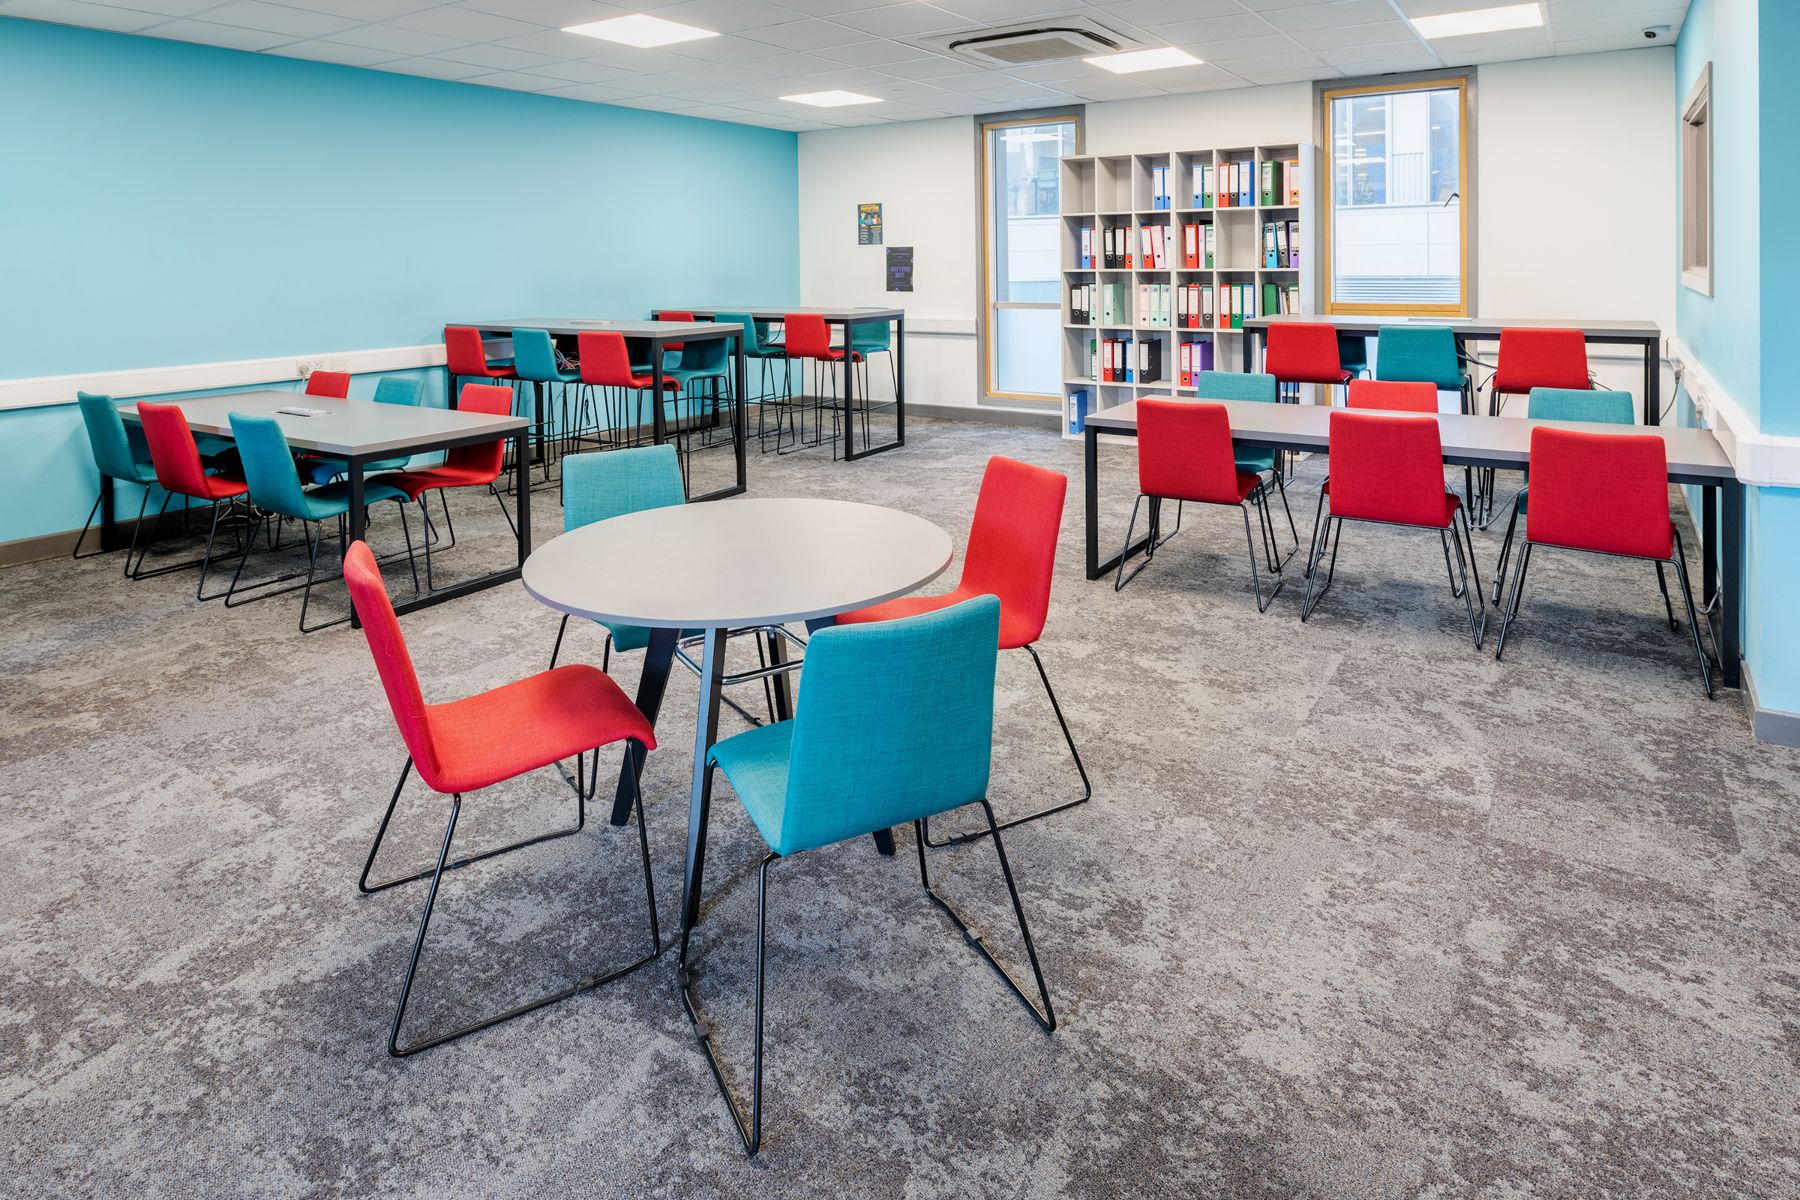 How Collaborative Learning Spaces Foster Leadership and Teamwork